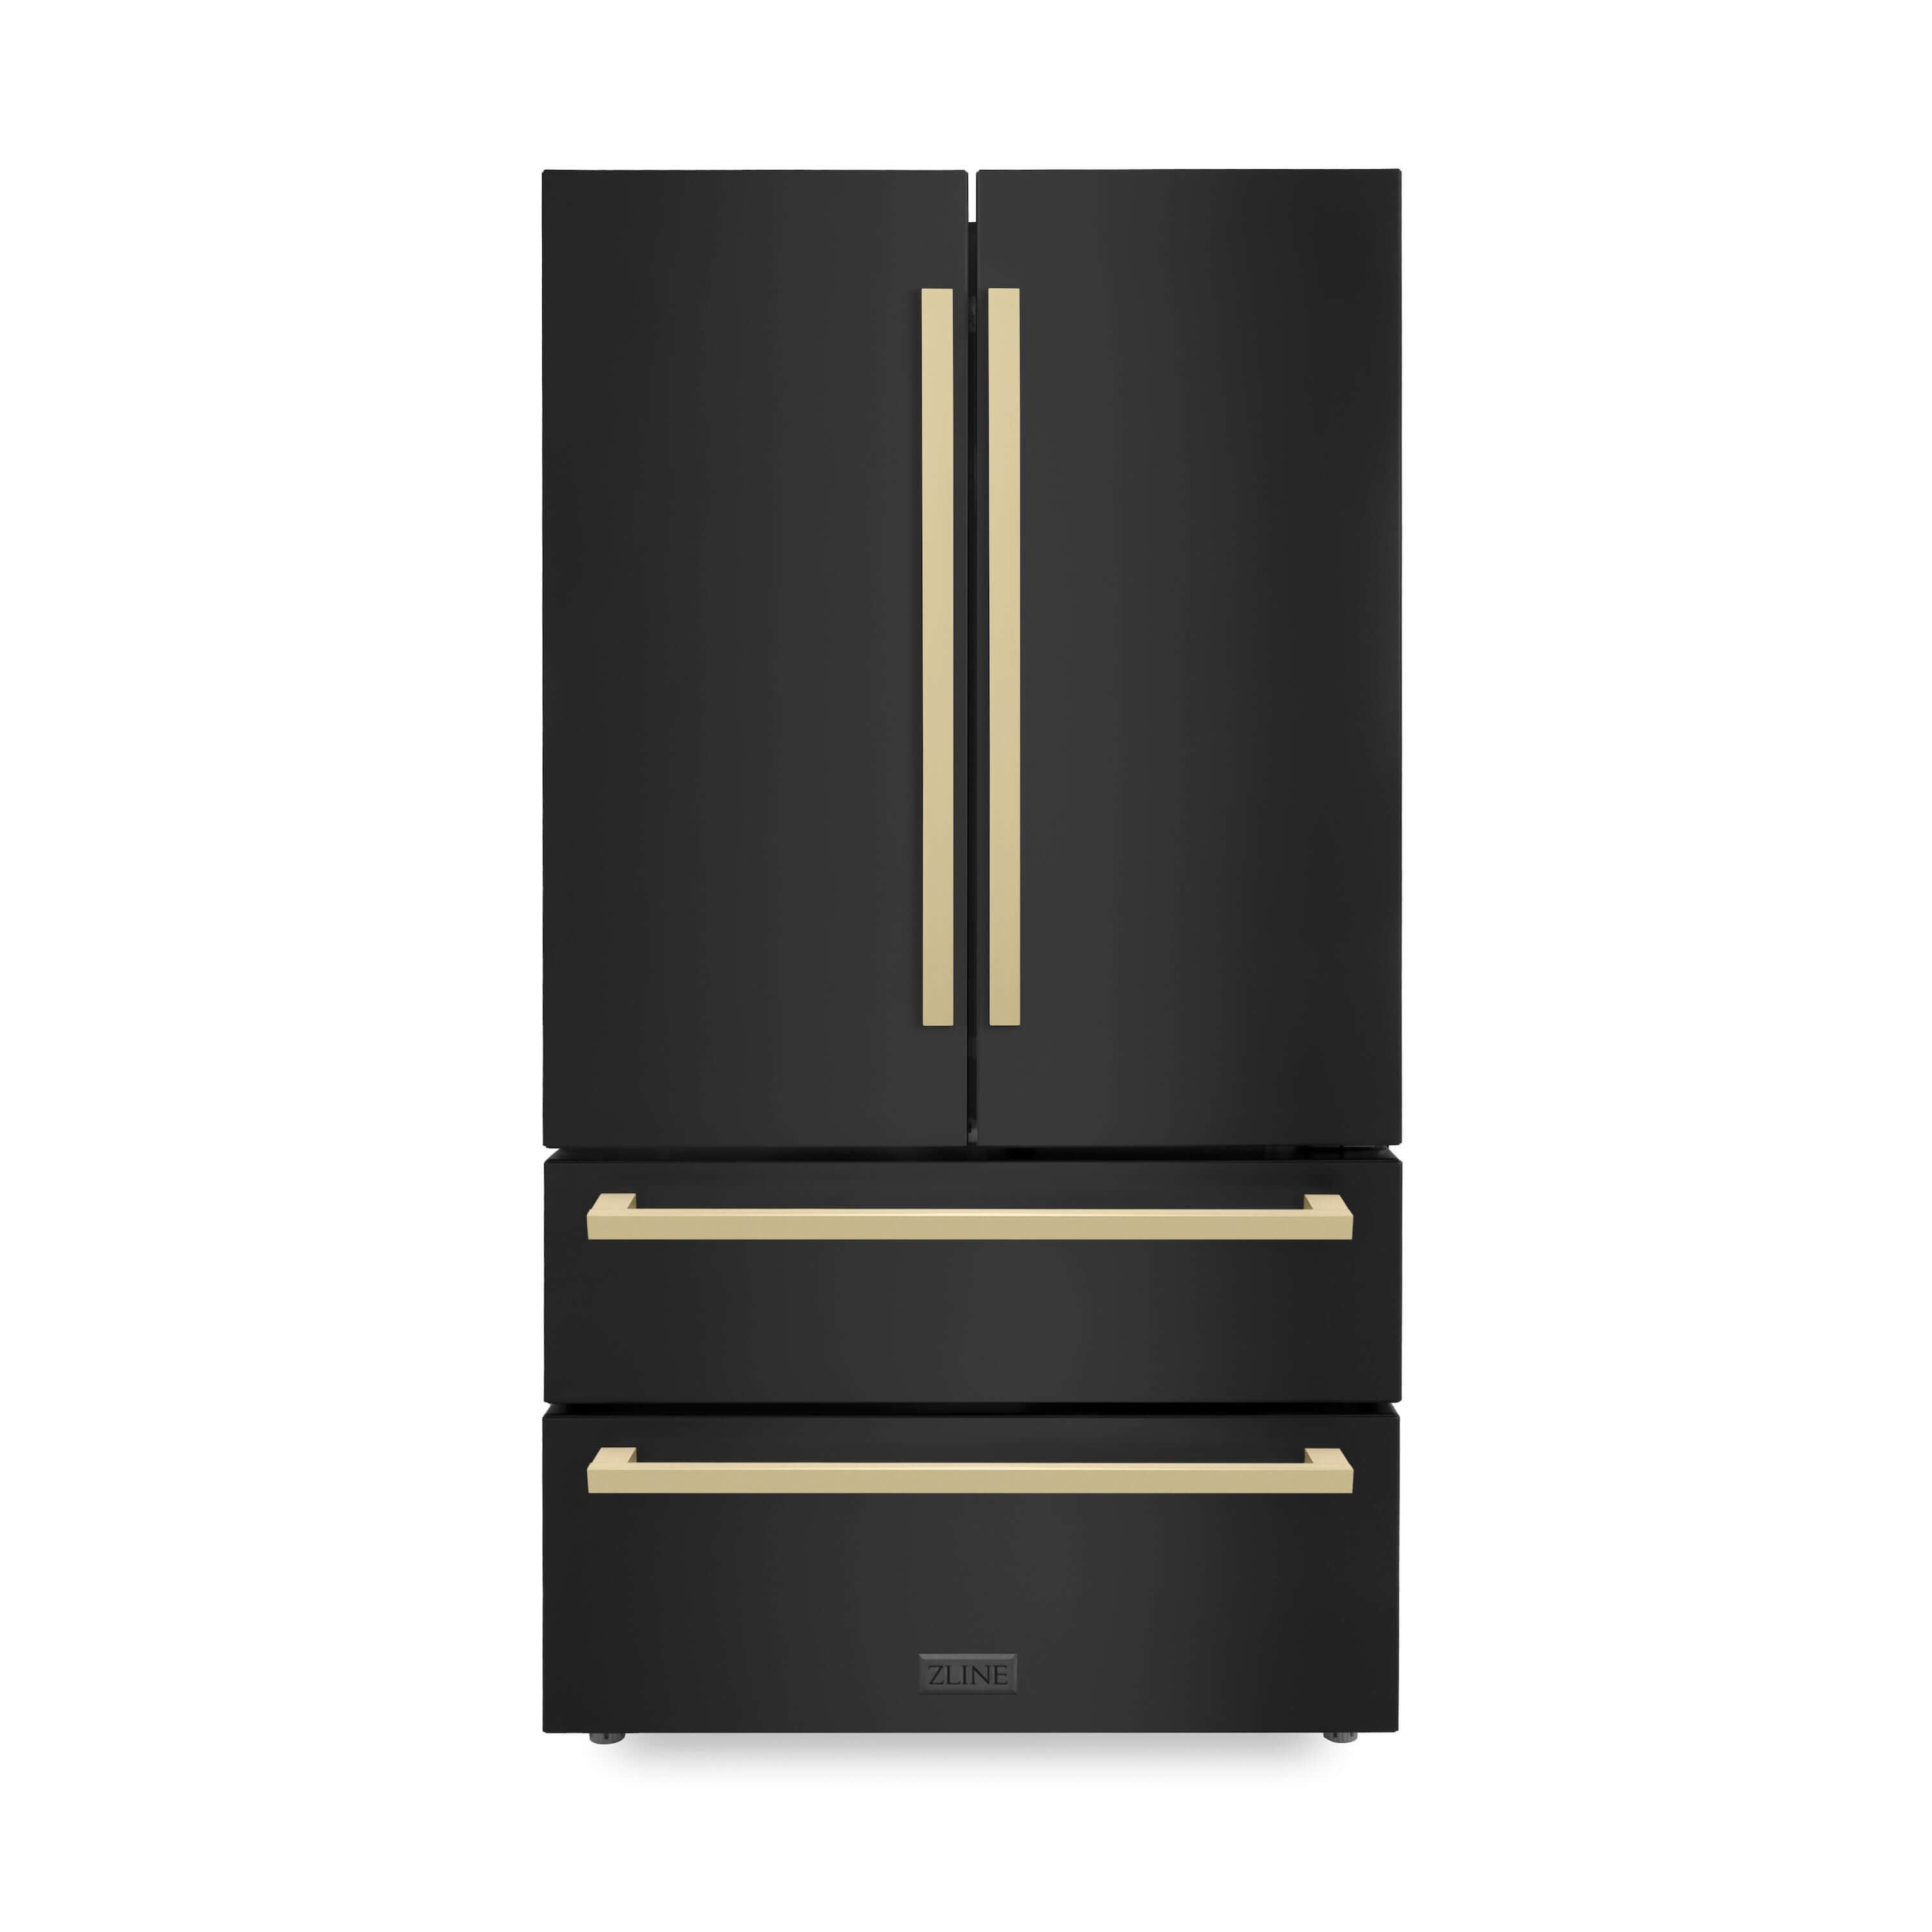 ZLINE Autograph Edition 36 in. 22.5 cu. ft 4-Door French Door Refrigerator with Ice Maker in Black Stainless Steel with Champagne Bronze Square Handles (RFMZ-36-BS-FCB) front, closed.